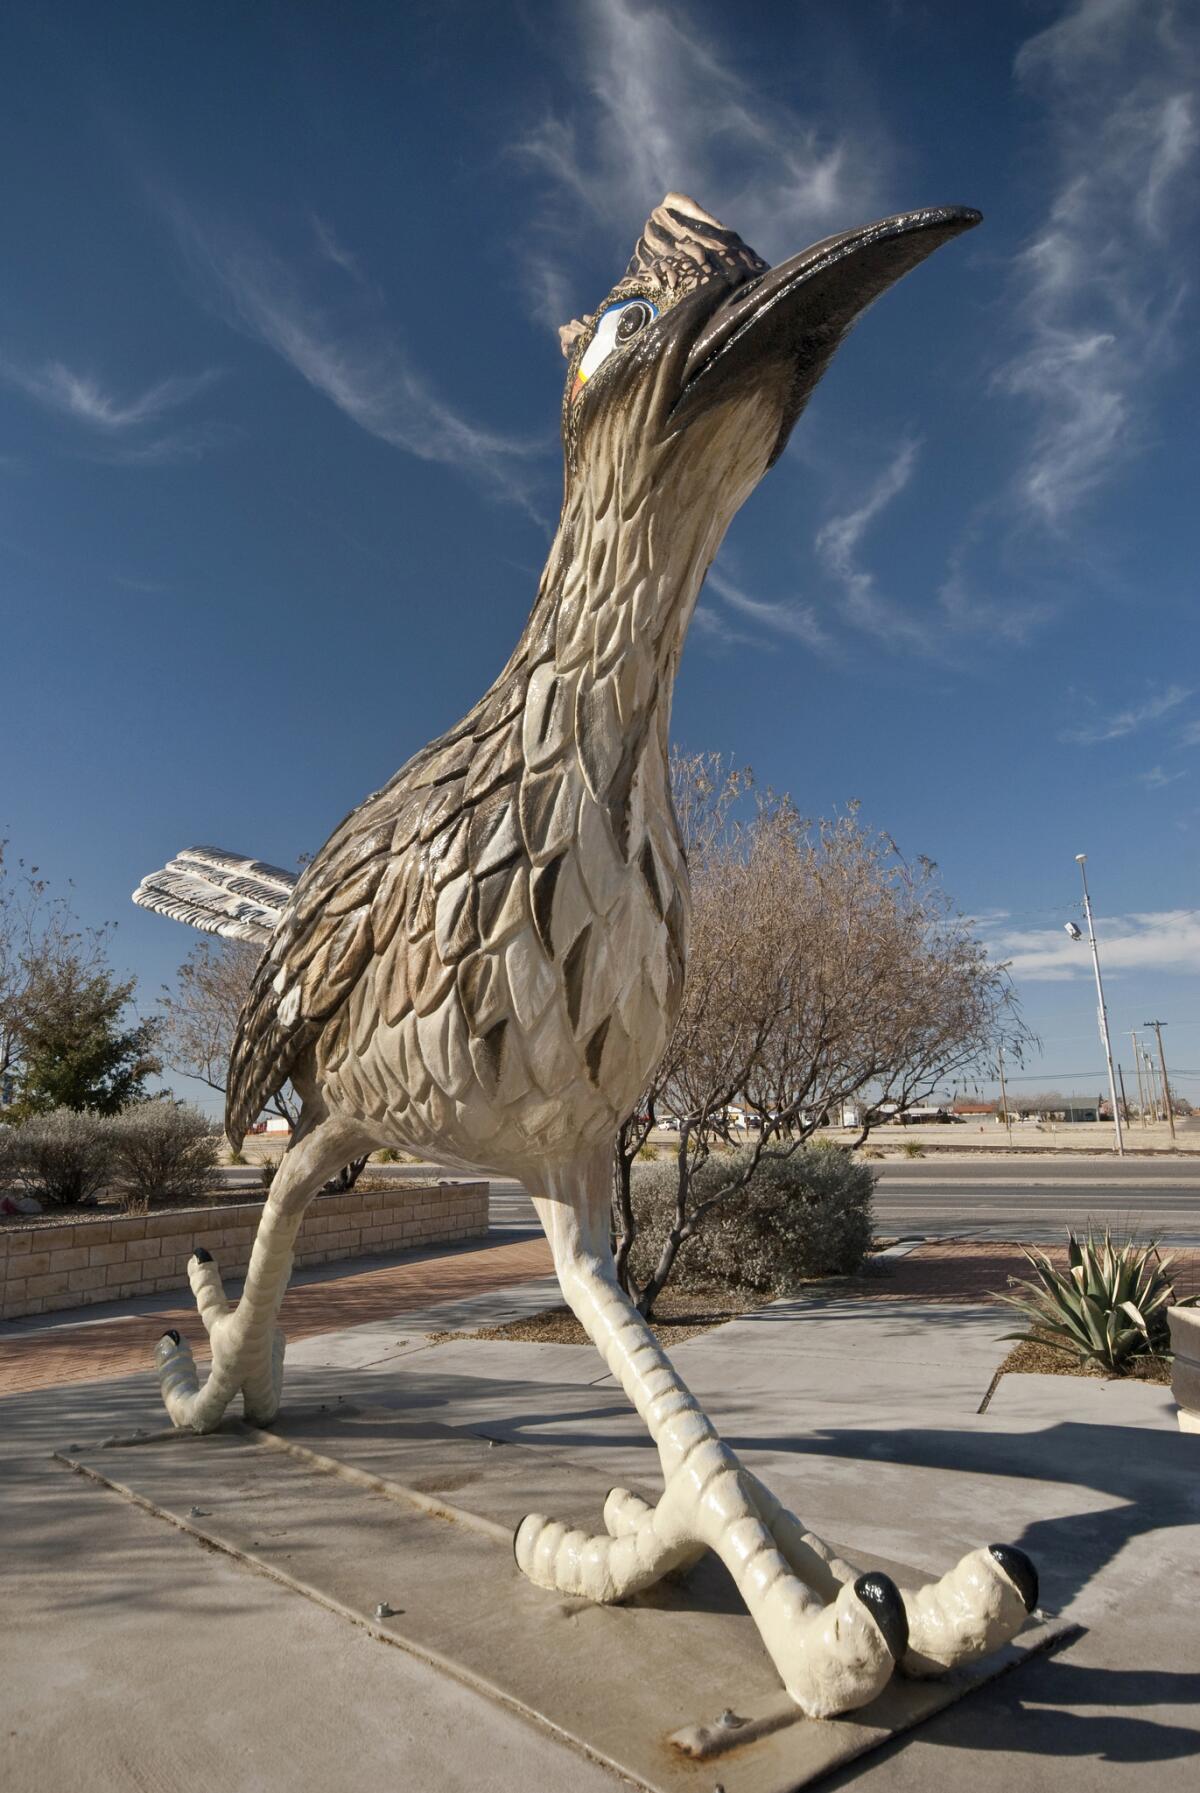 Paisano Pete was for many years the World's Largest Roadrunner. At 22 feet long and 11 feet tall, he's still pretty big.